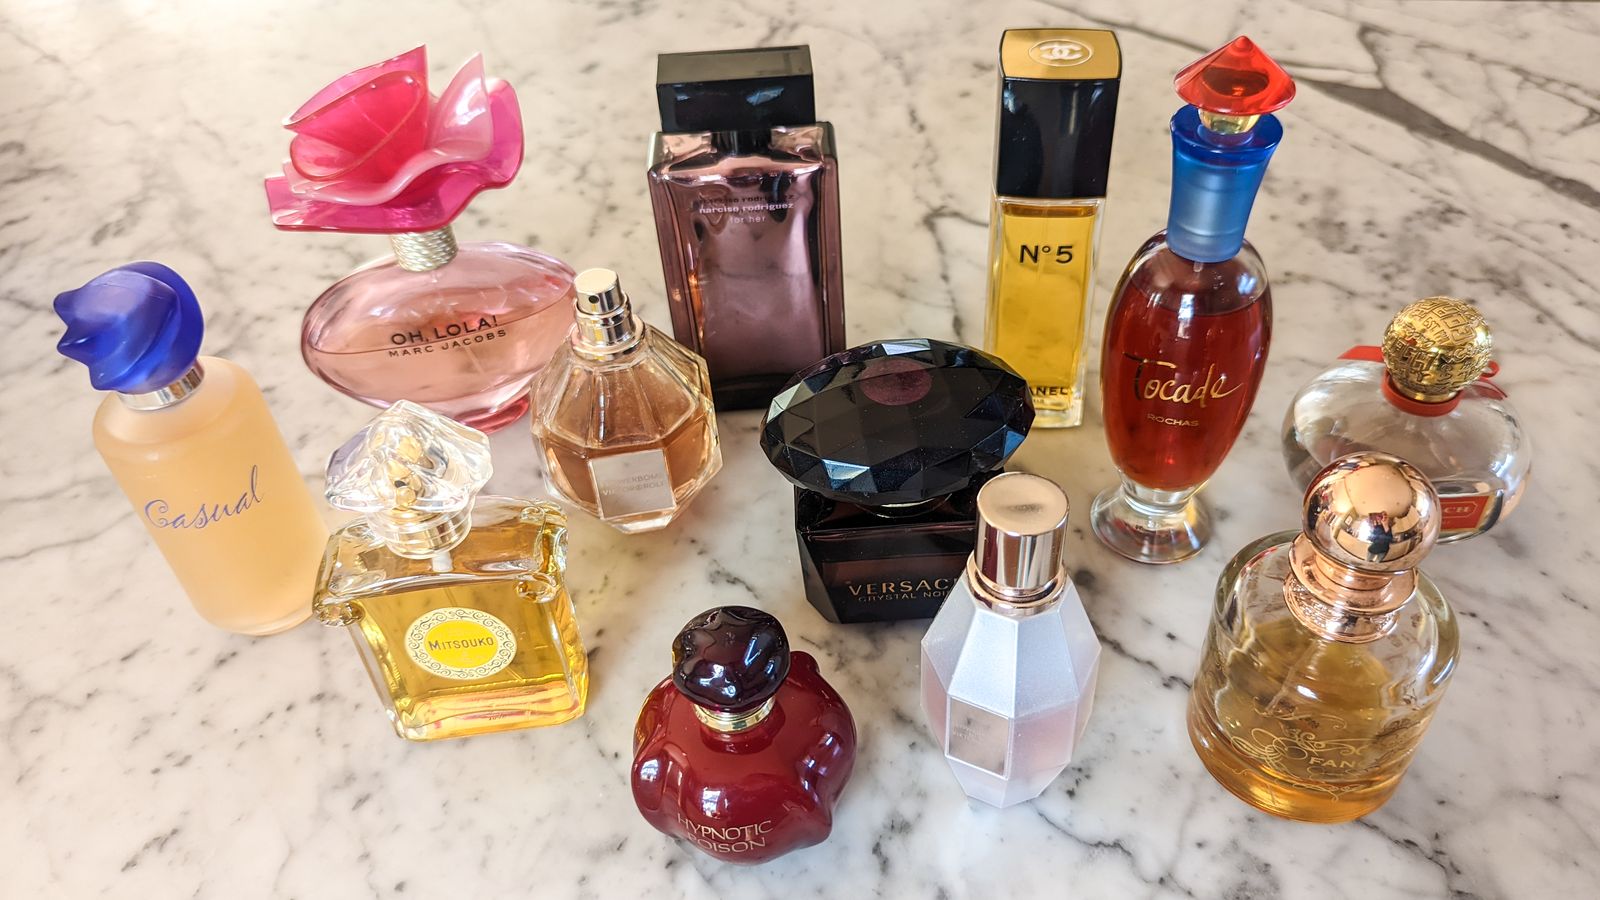 Best perfumes for women: 15 scents for her on Valentine's Day 2023